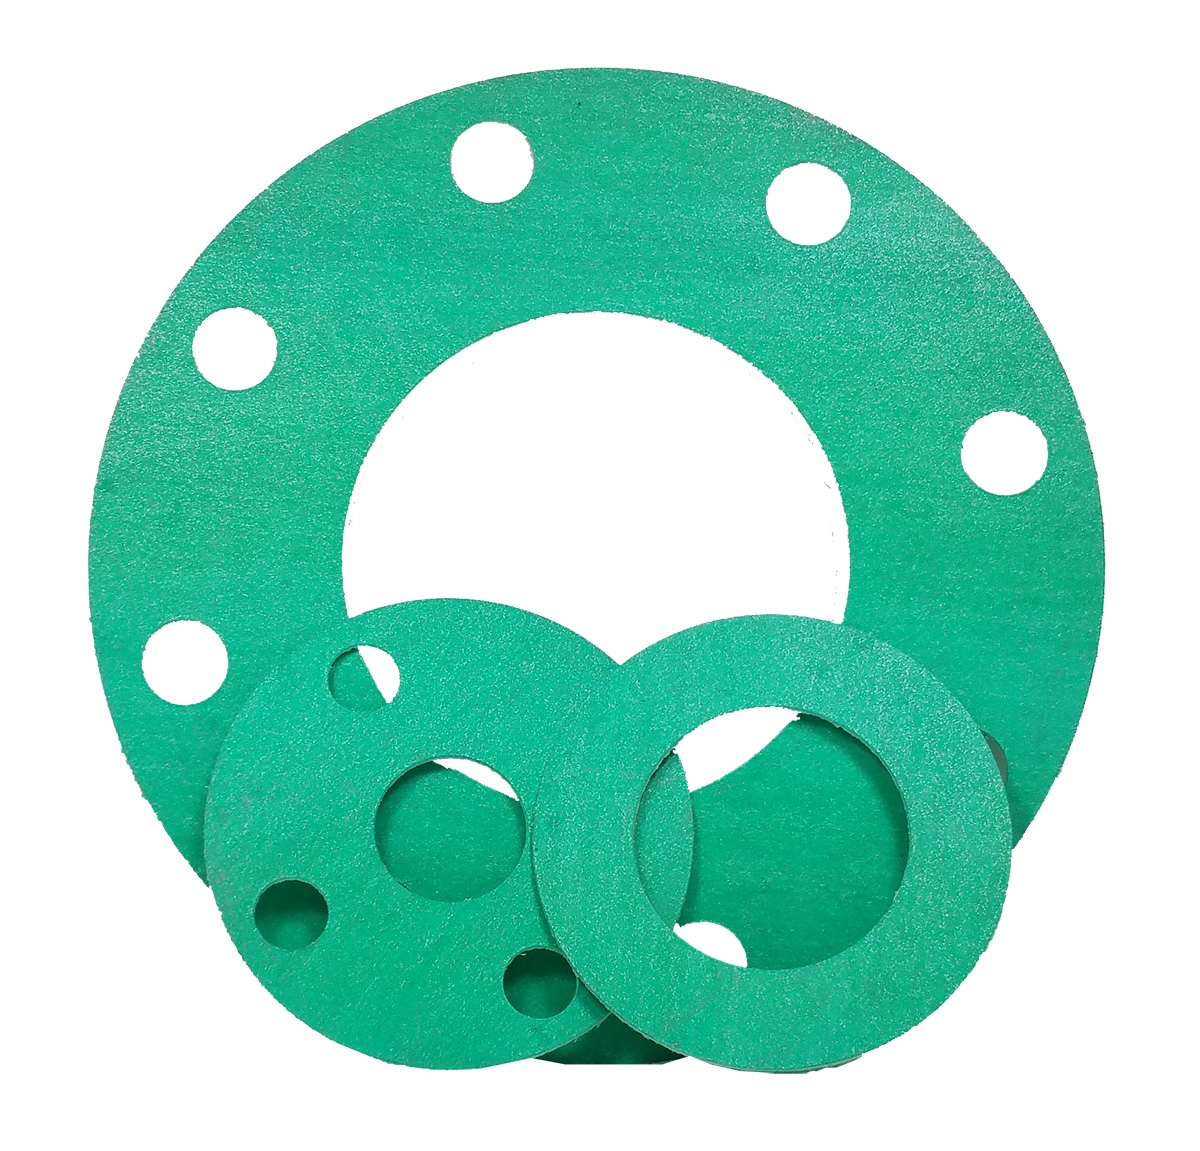 Pack of 20 Aramid/NBR Full Face Gasket 2 Pipe Size Pressure Class 300# 0.031 Thick Green/Blue/White Sterling Seal CFF7001.200.031.300X20 7001 Compressed Non-Asbestos 